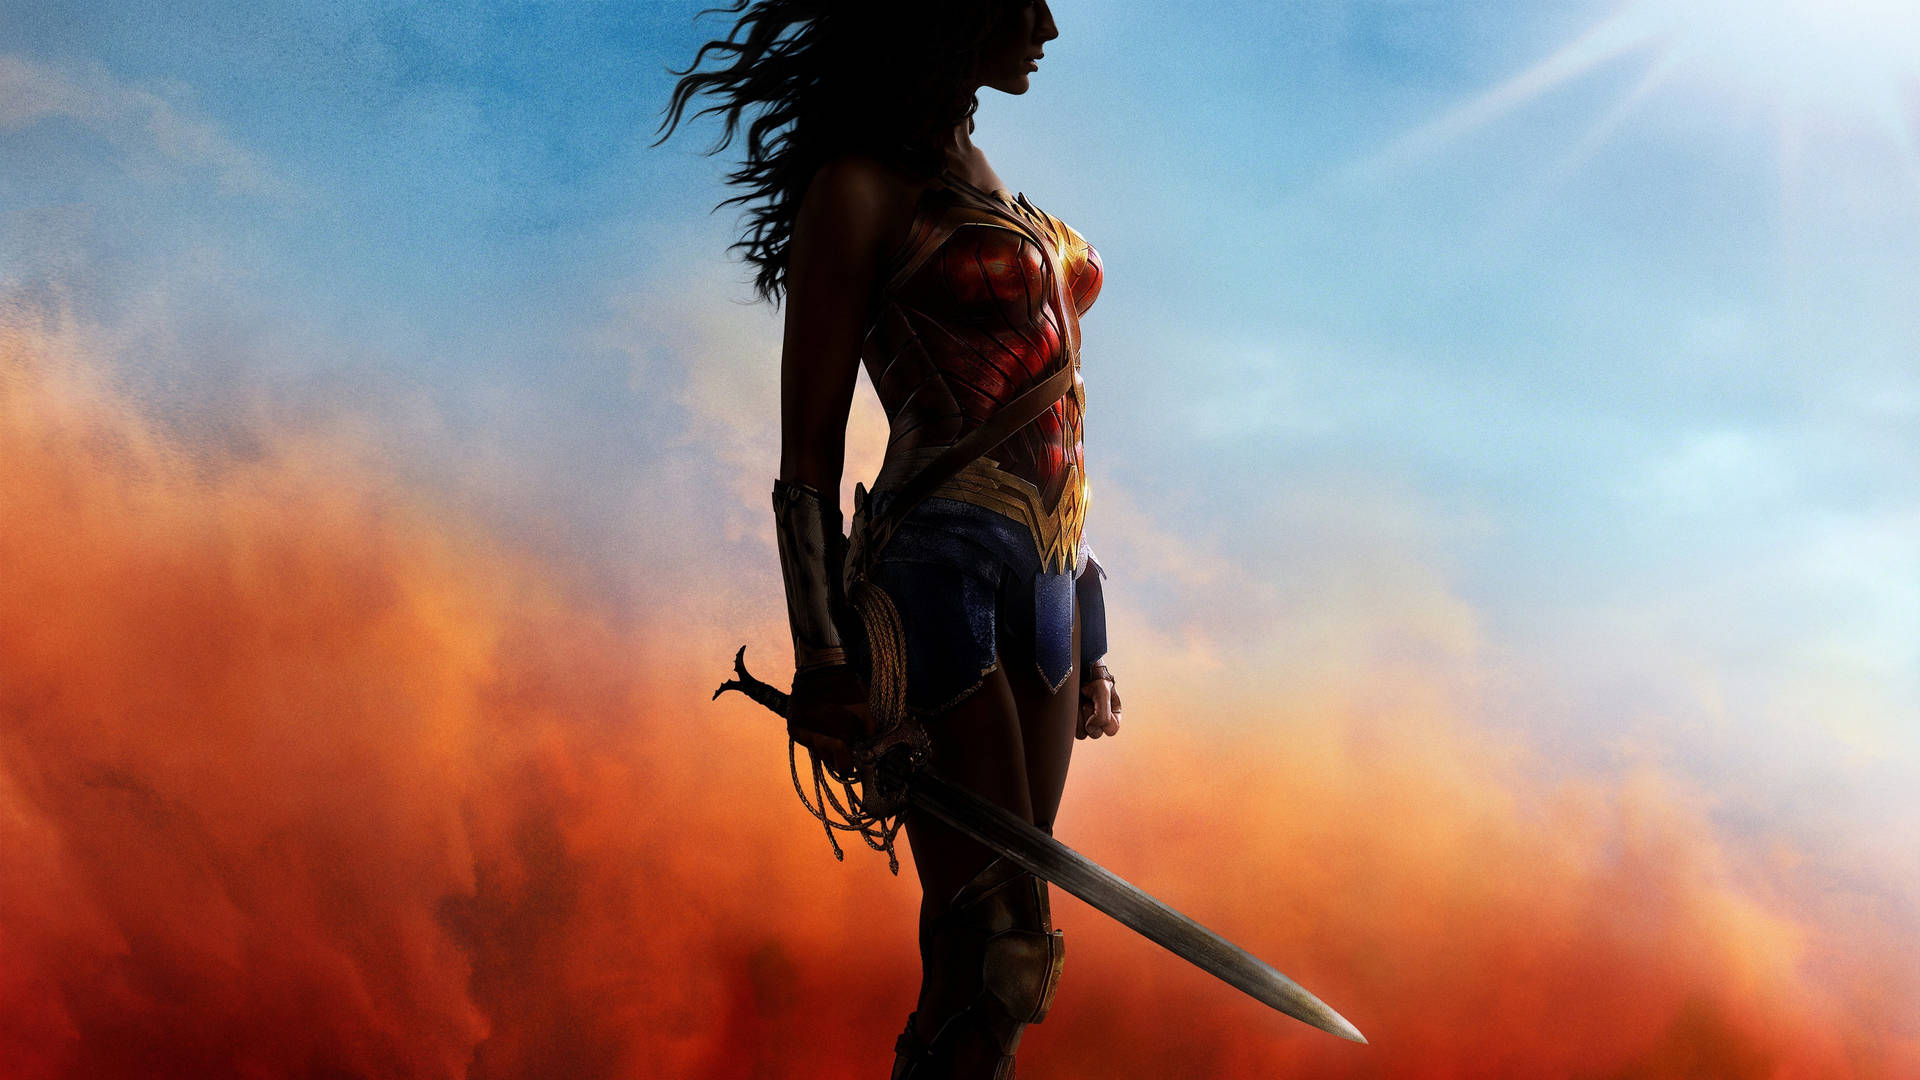 Wonder Woman Silhouette Poster Background